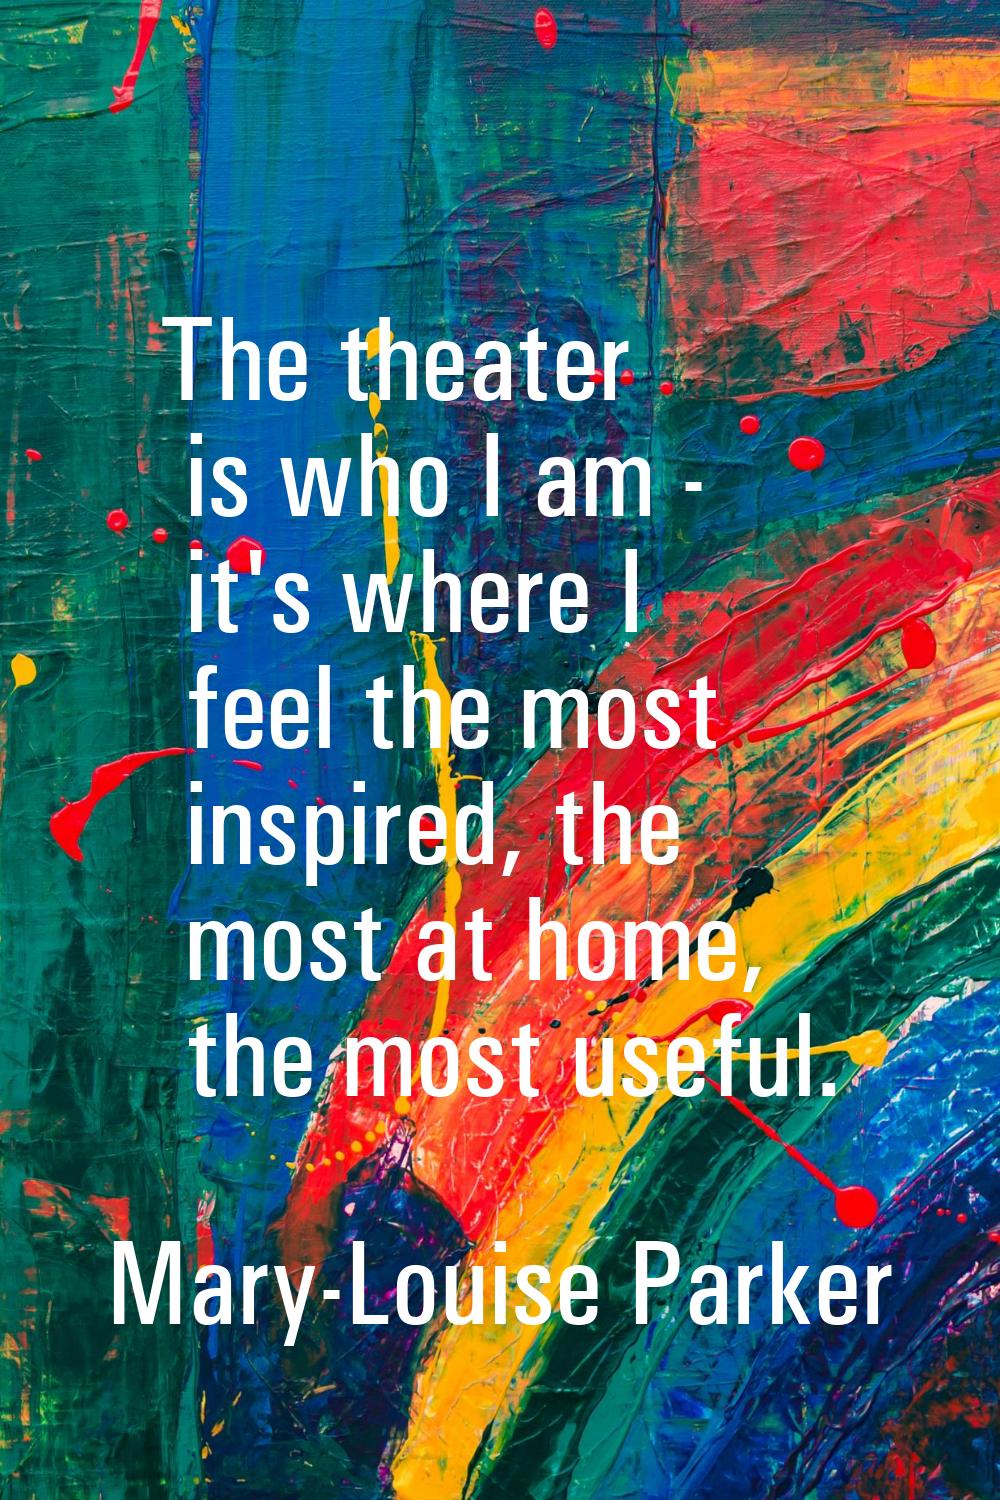 The theater is who I am - it's where I feel the most inspired, the most at home, the most useful.